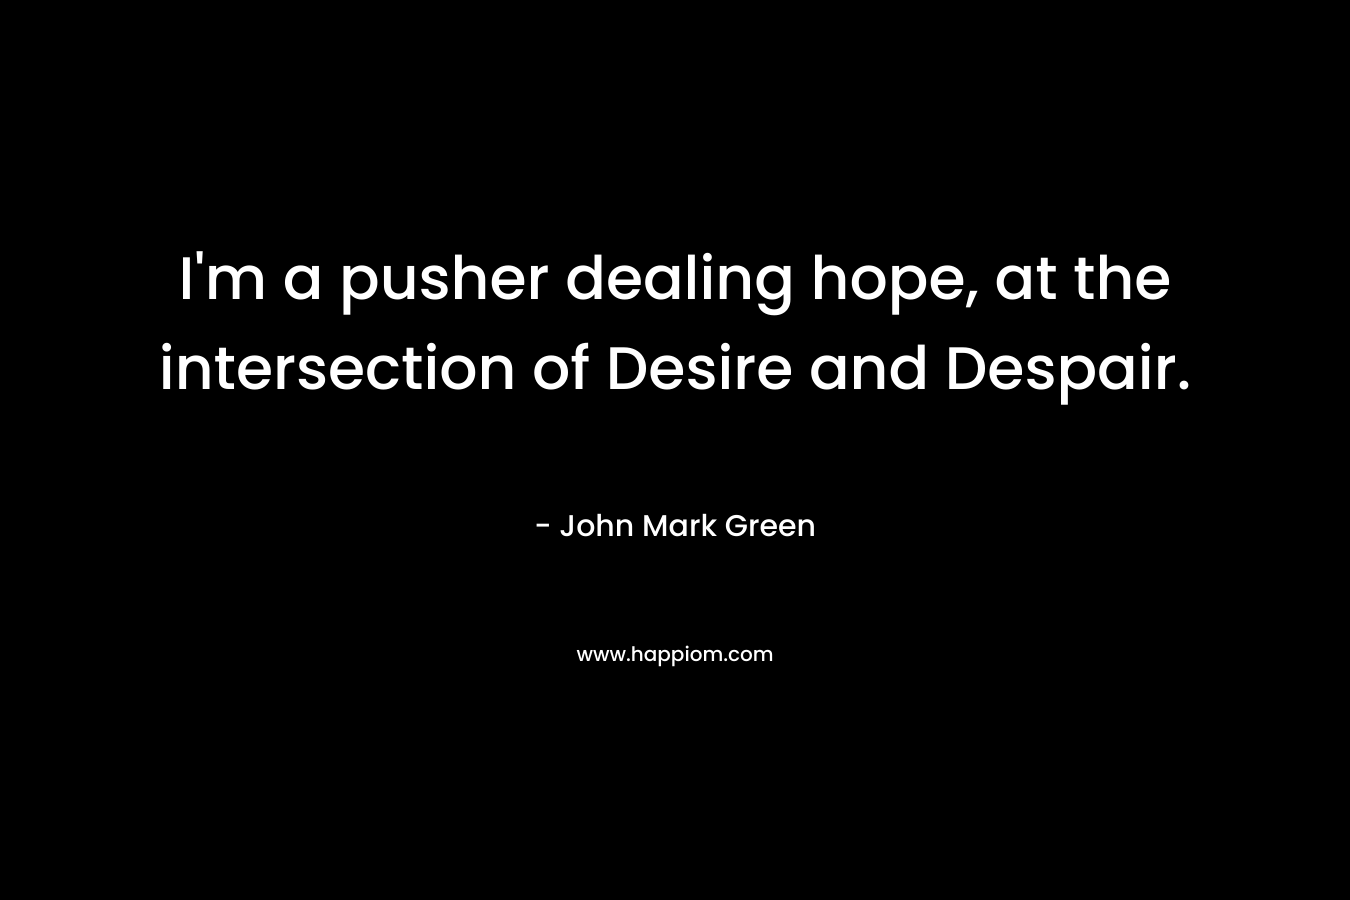 I’m a pusher dealing hope, at the intersection of Desire and Despair. – John Mark Green